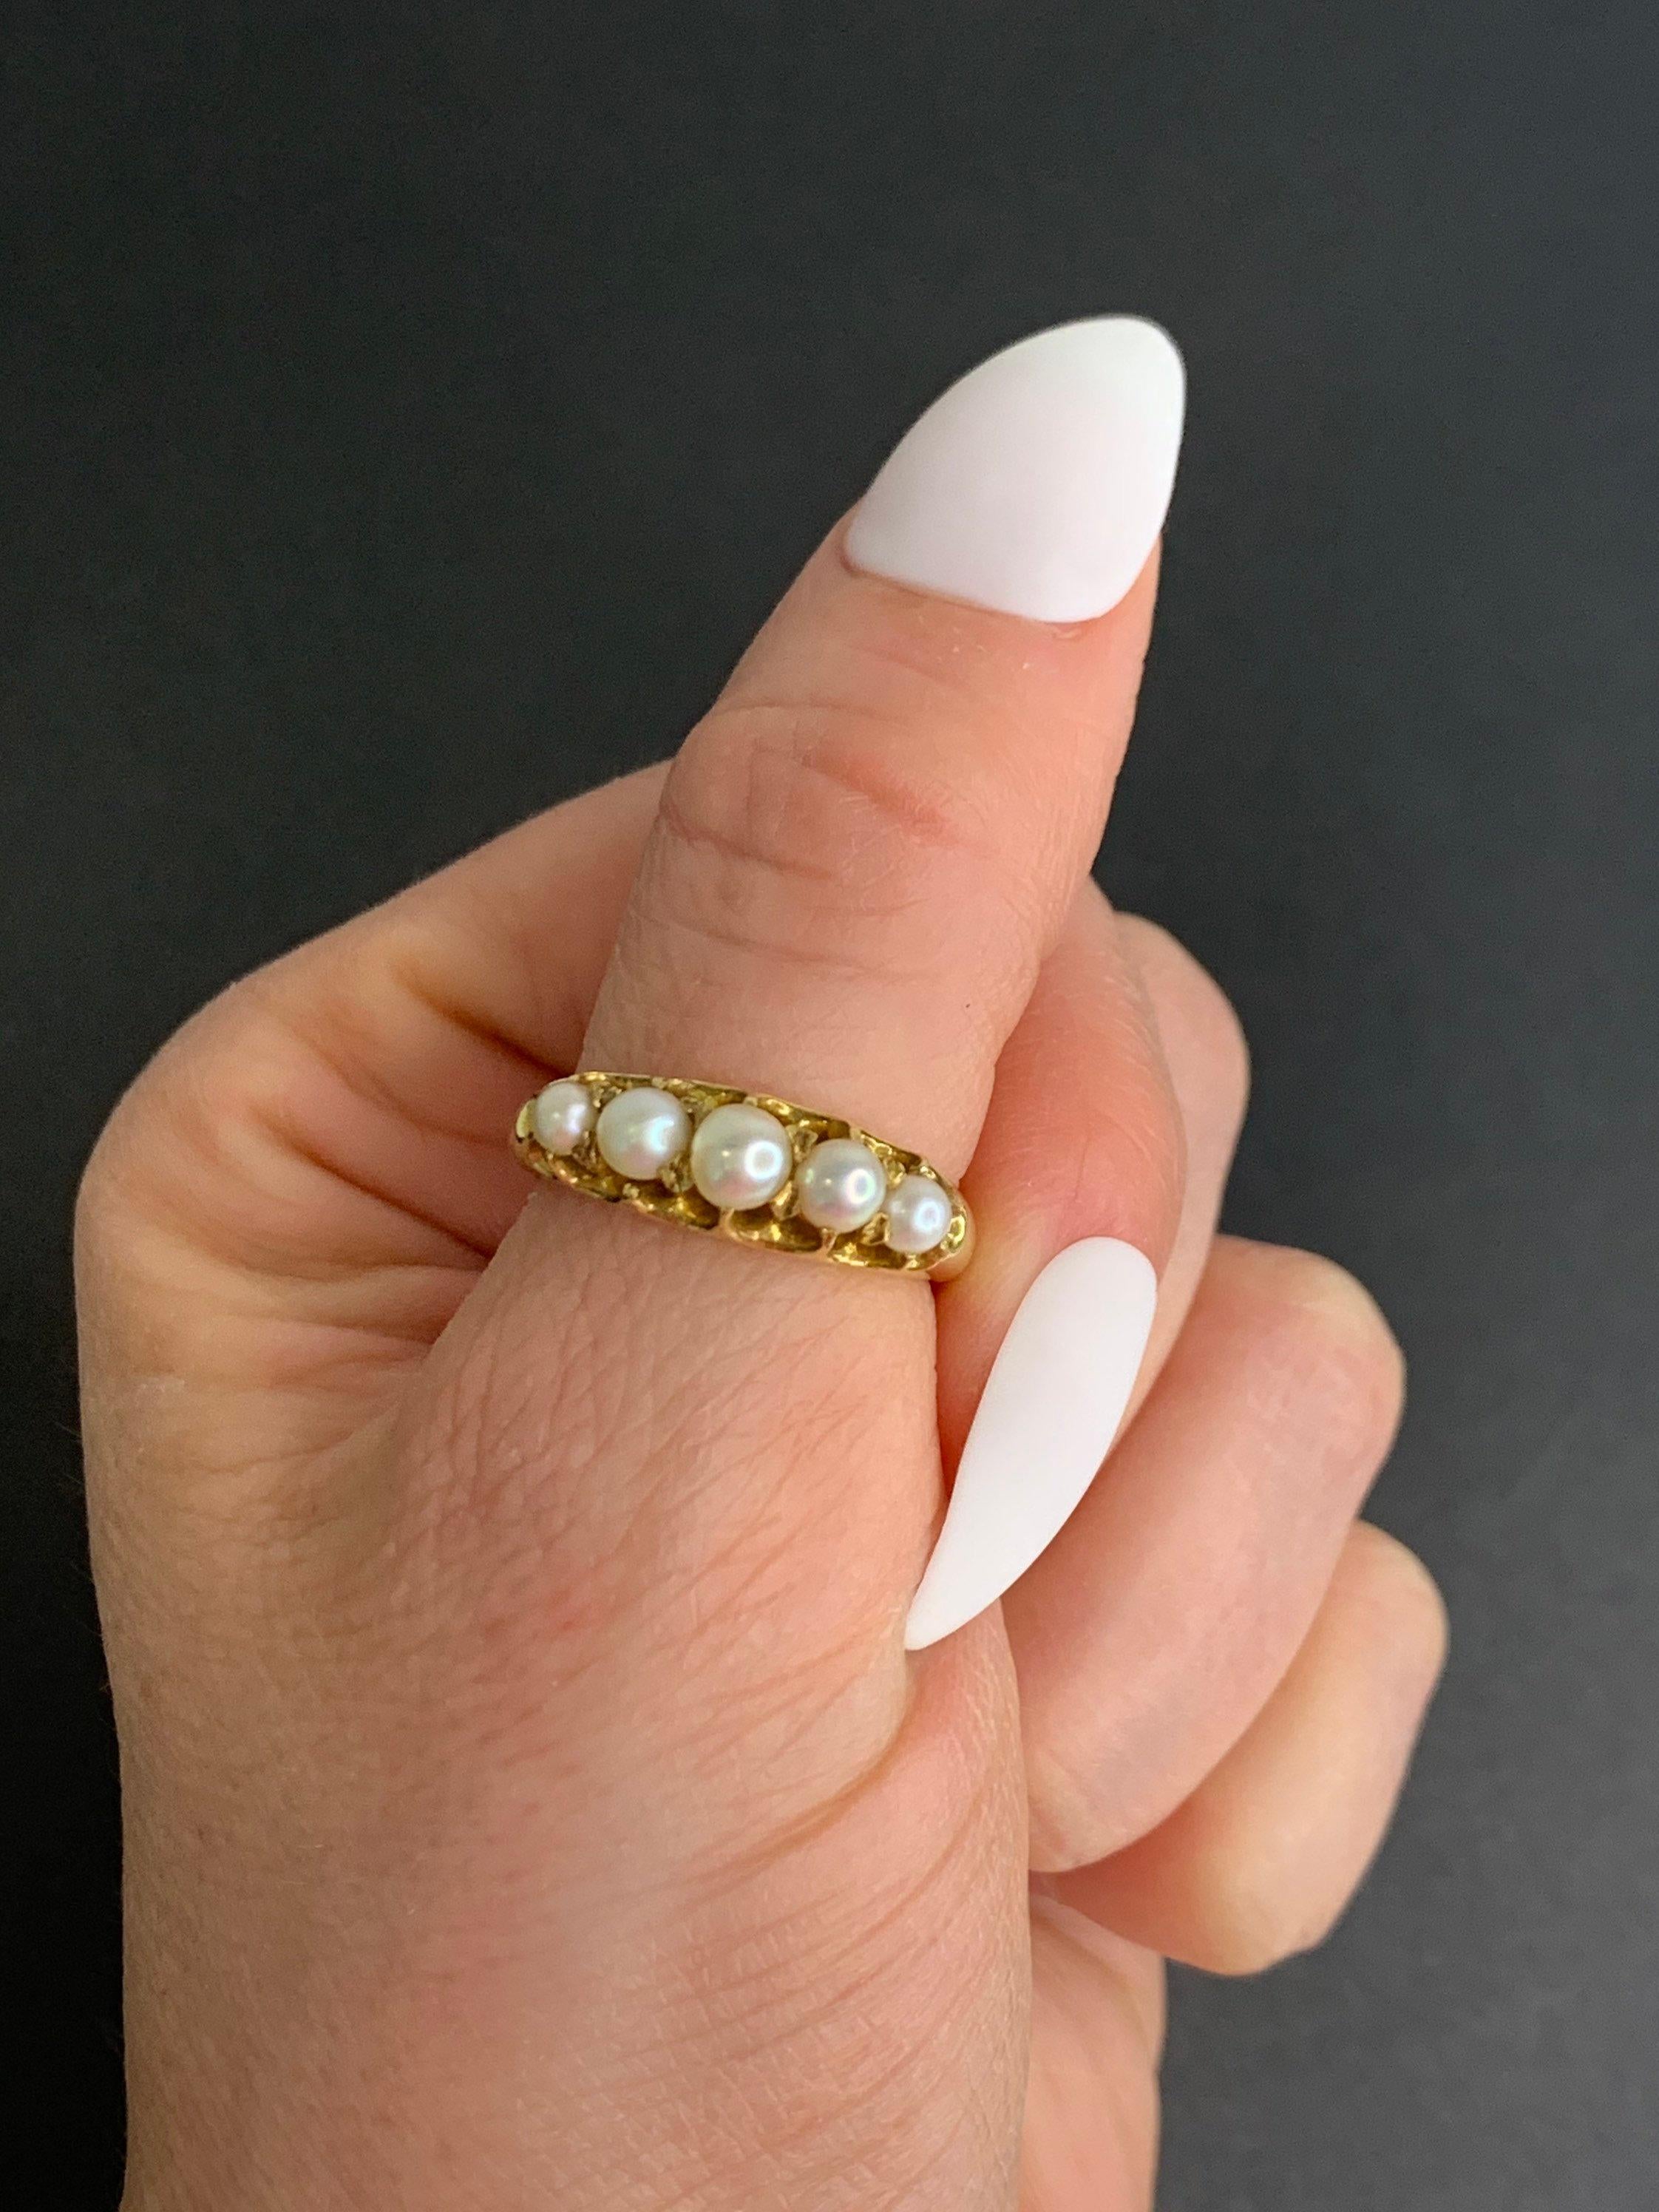 Antique Pearl 5 Stone Ring

18ct Gold 

Edwardian Circa 1900

Size UK N 

Size US 7

Can be resized using our resizing service,
please contact us for more information

All of our items are either Antique, Vintage or Preloved. They are in used